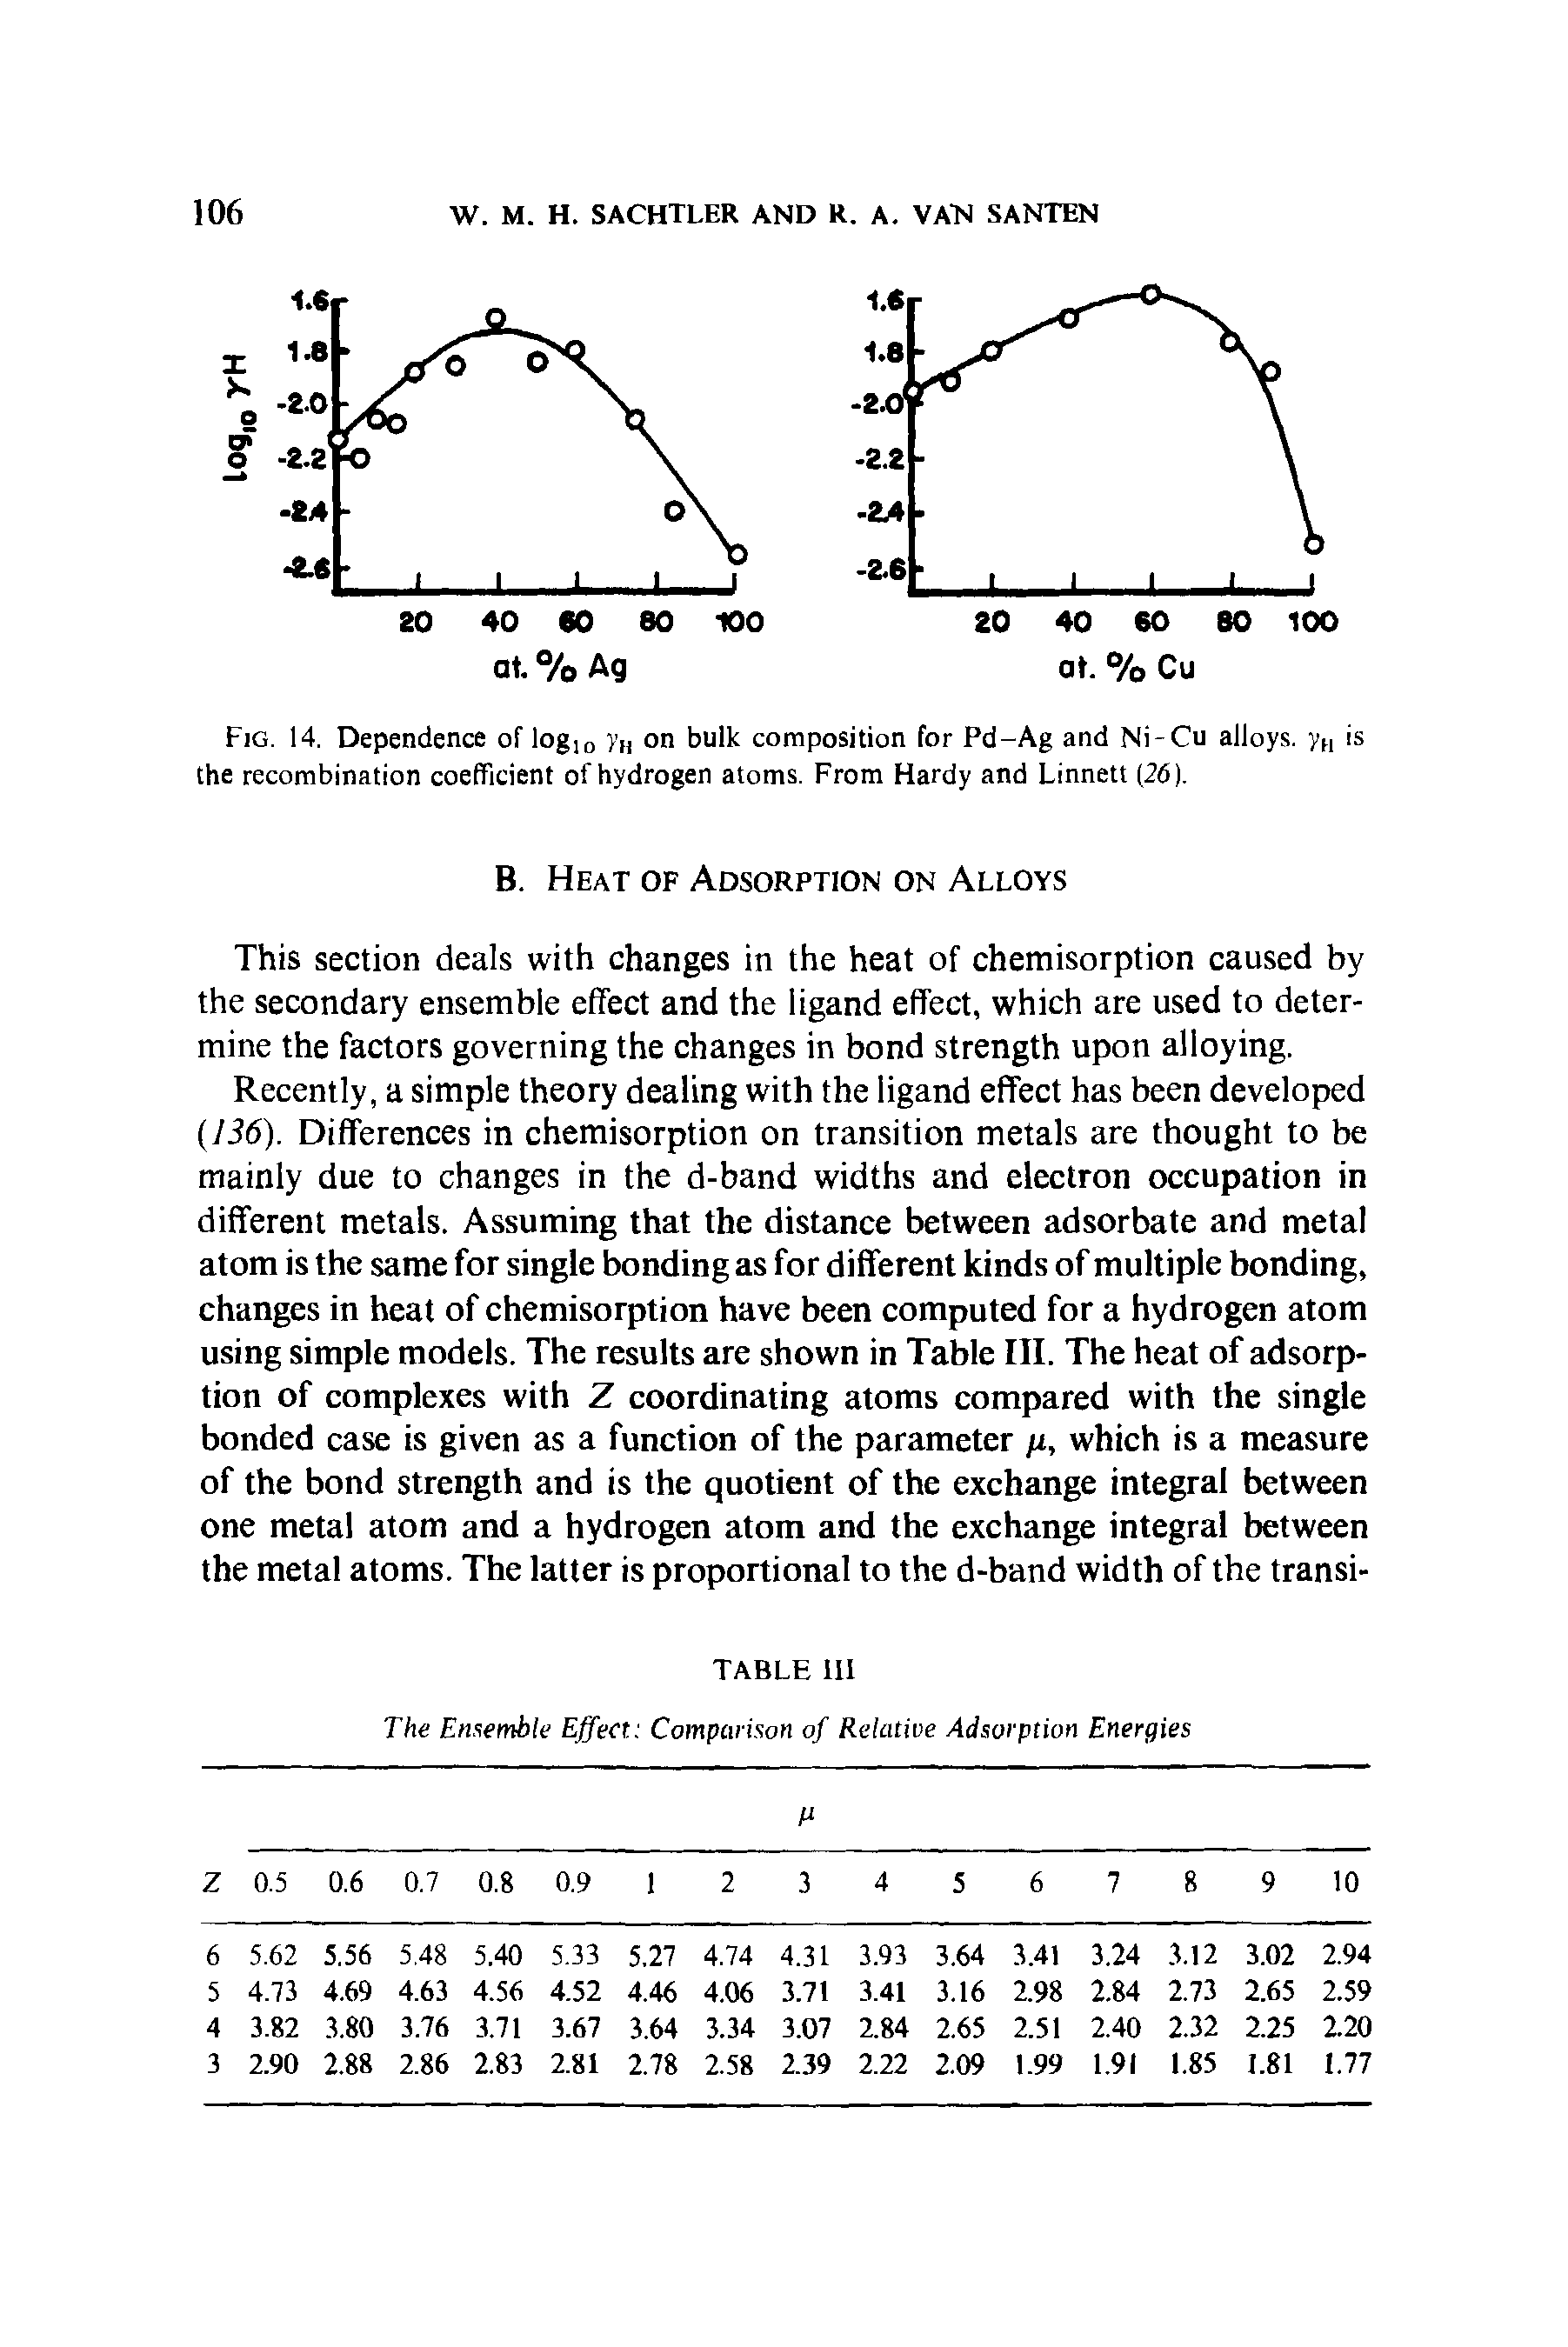 Fig. 14. Dependence of log10 on bulk composition for Pd-Ag and Ni-Cu alloys. yH is the recombination coefficient of hydrogen atoms. From Hardy and Linnett (26).